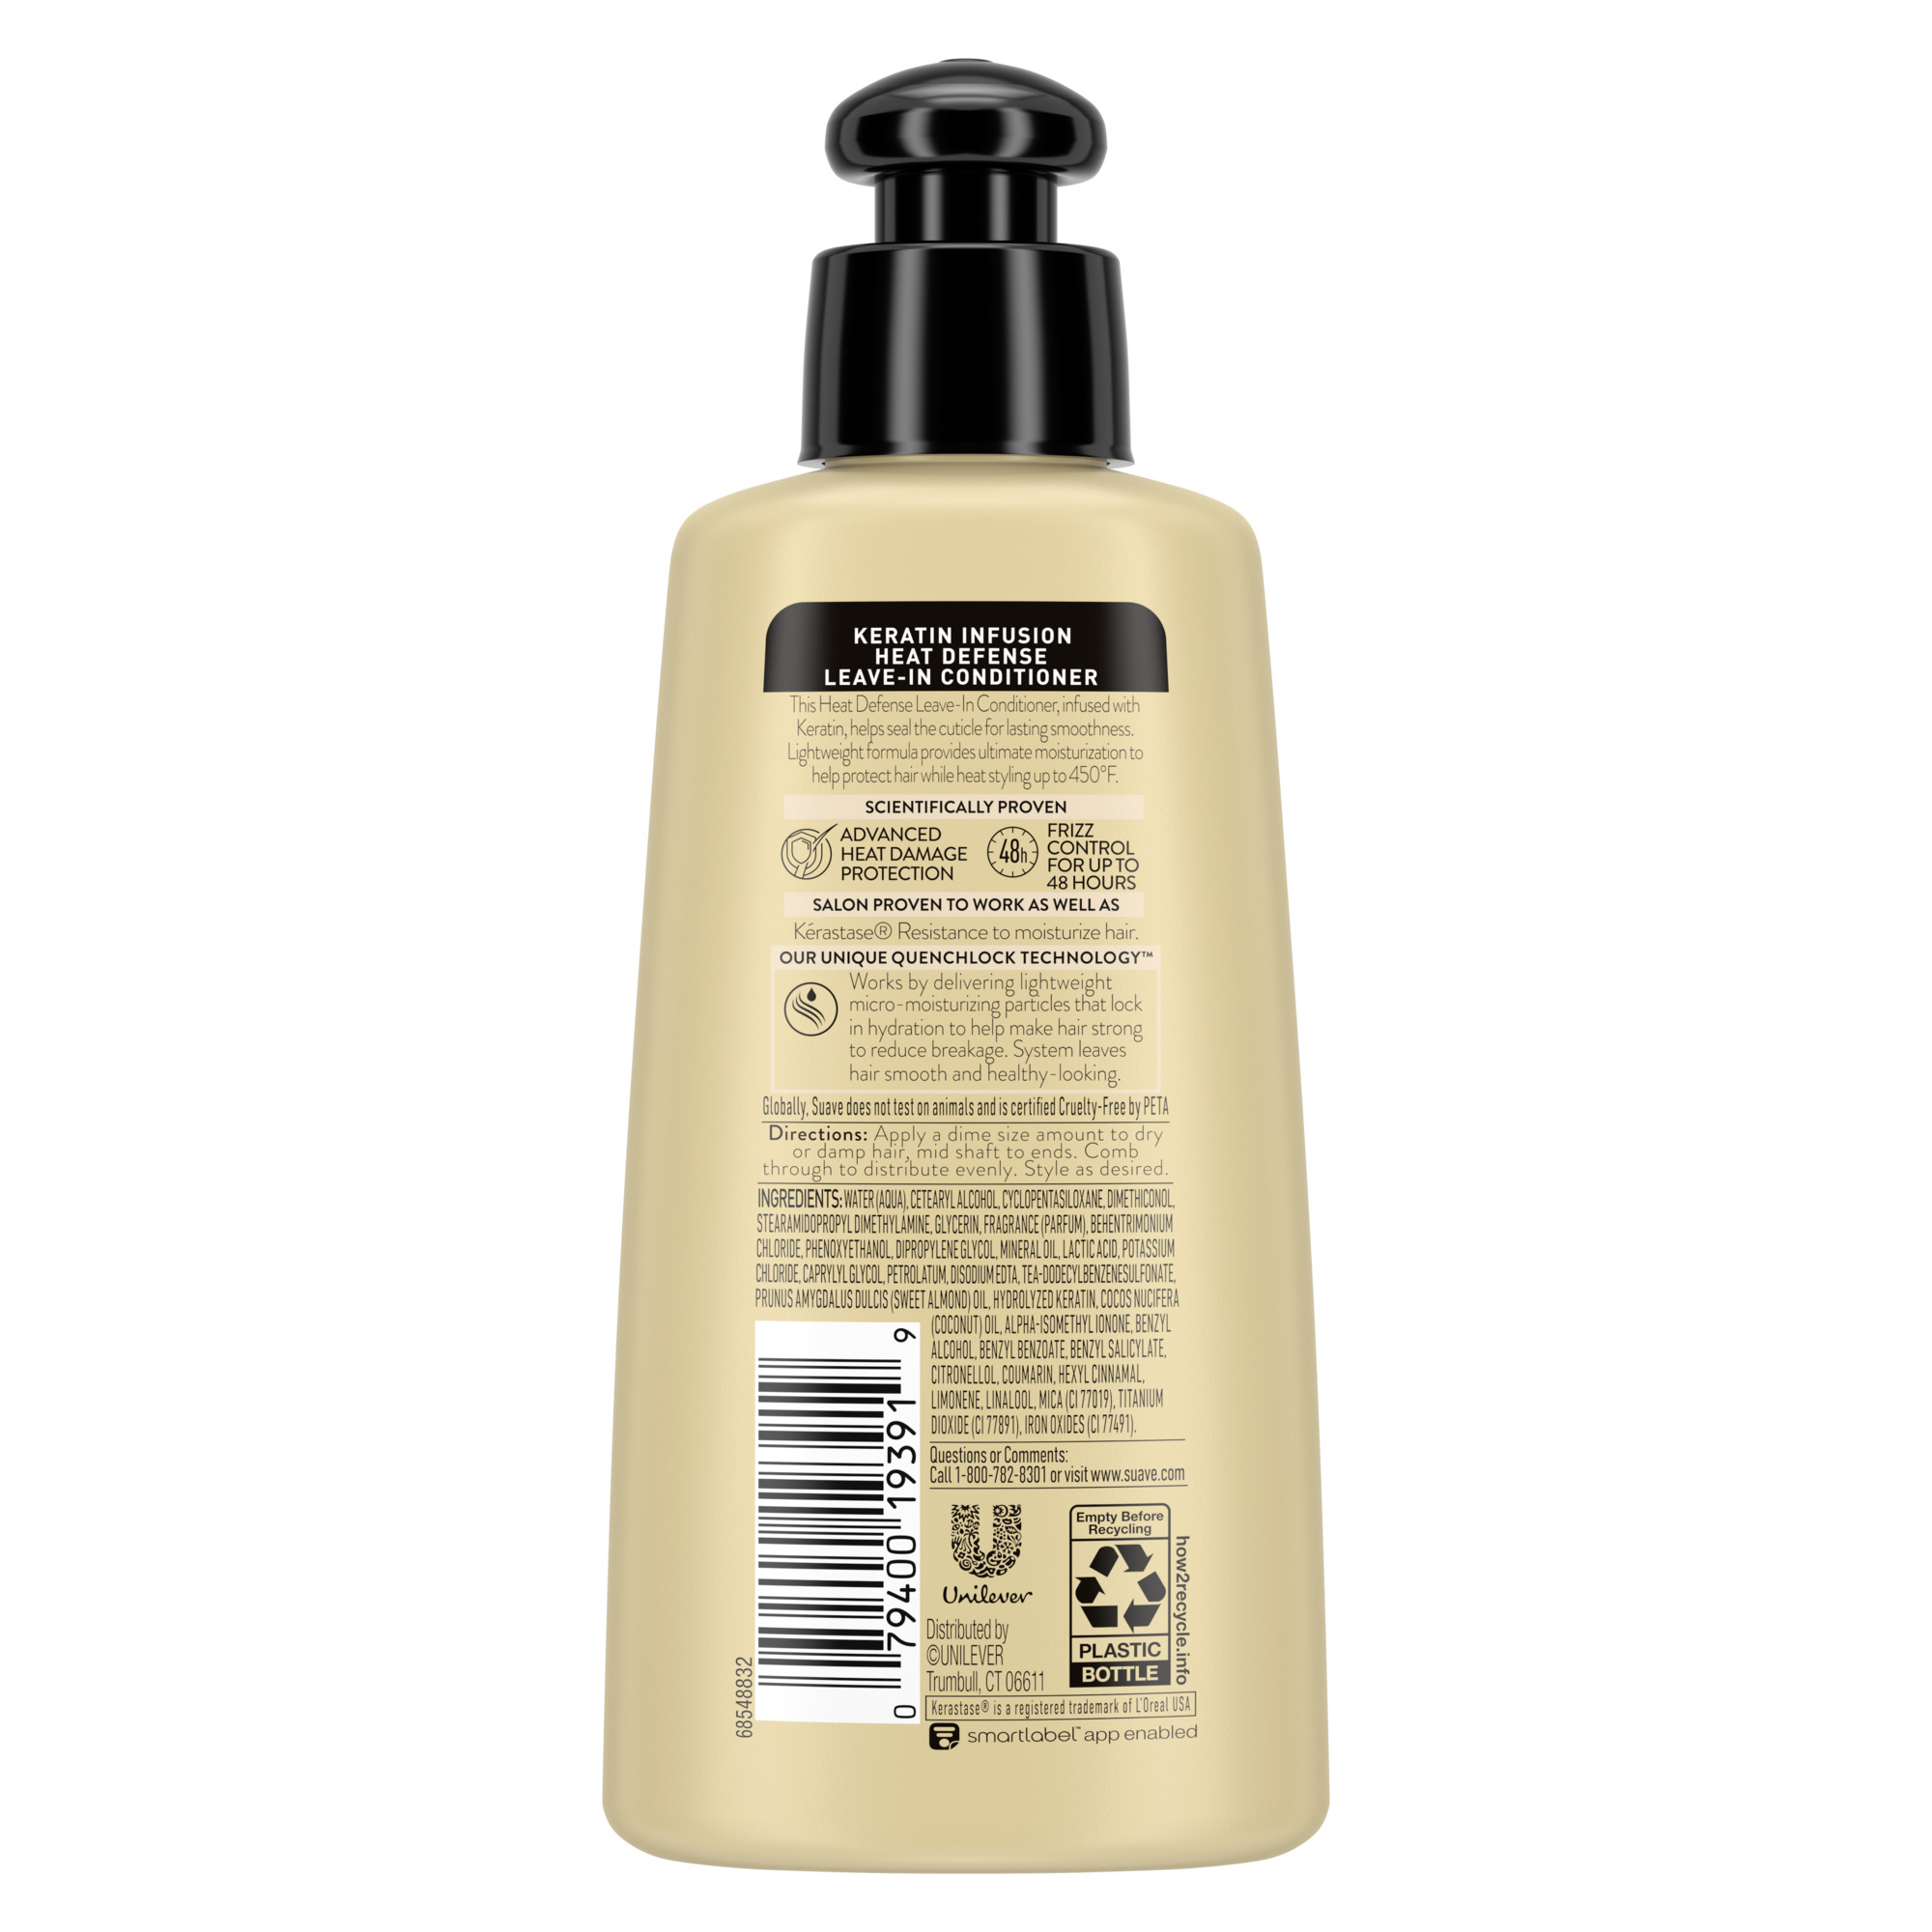 Suave Keratin Infusion Heat Defense Leave-in Conditioner 5.1 fl oz - image 3 of 5